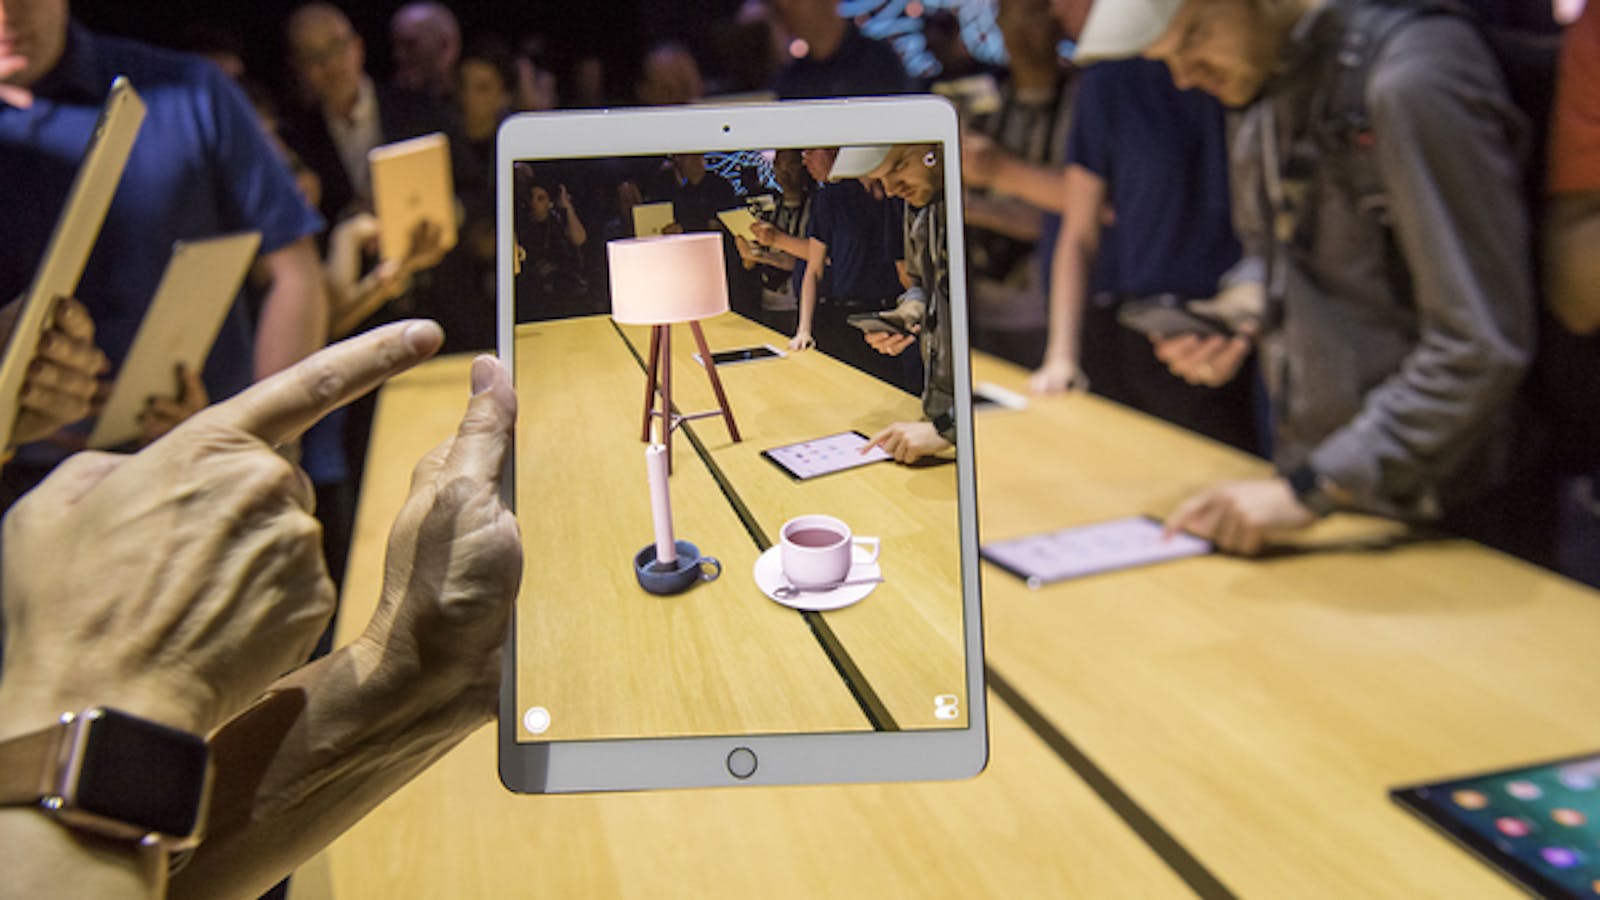 ARKit being demonstrated on an iPad at WWDC in June. Photo by Bloomberg